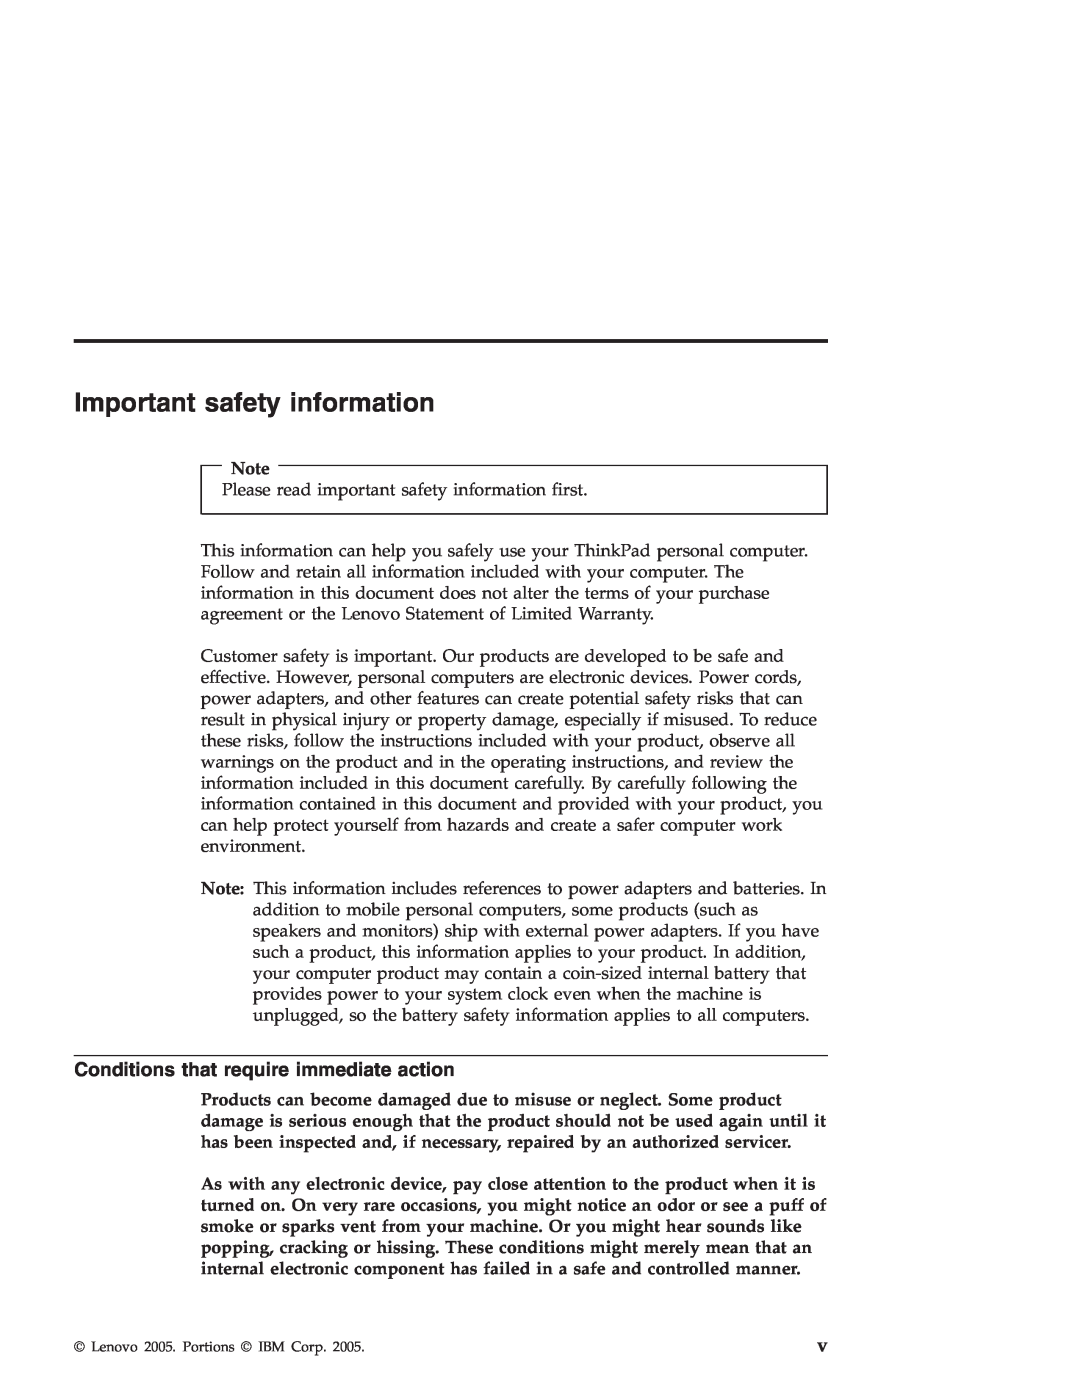 Lenovo T40 manual Important safety information, Conditions that require immediate action 